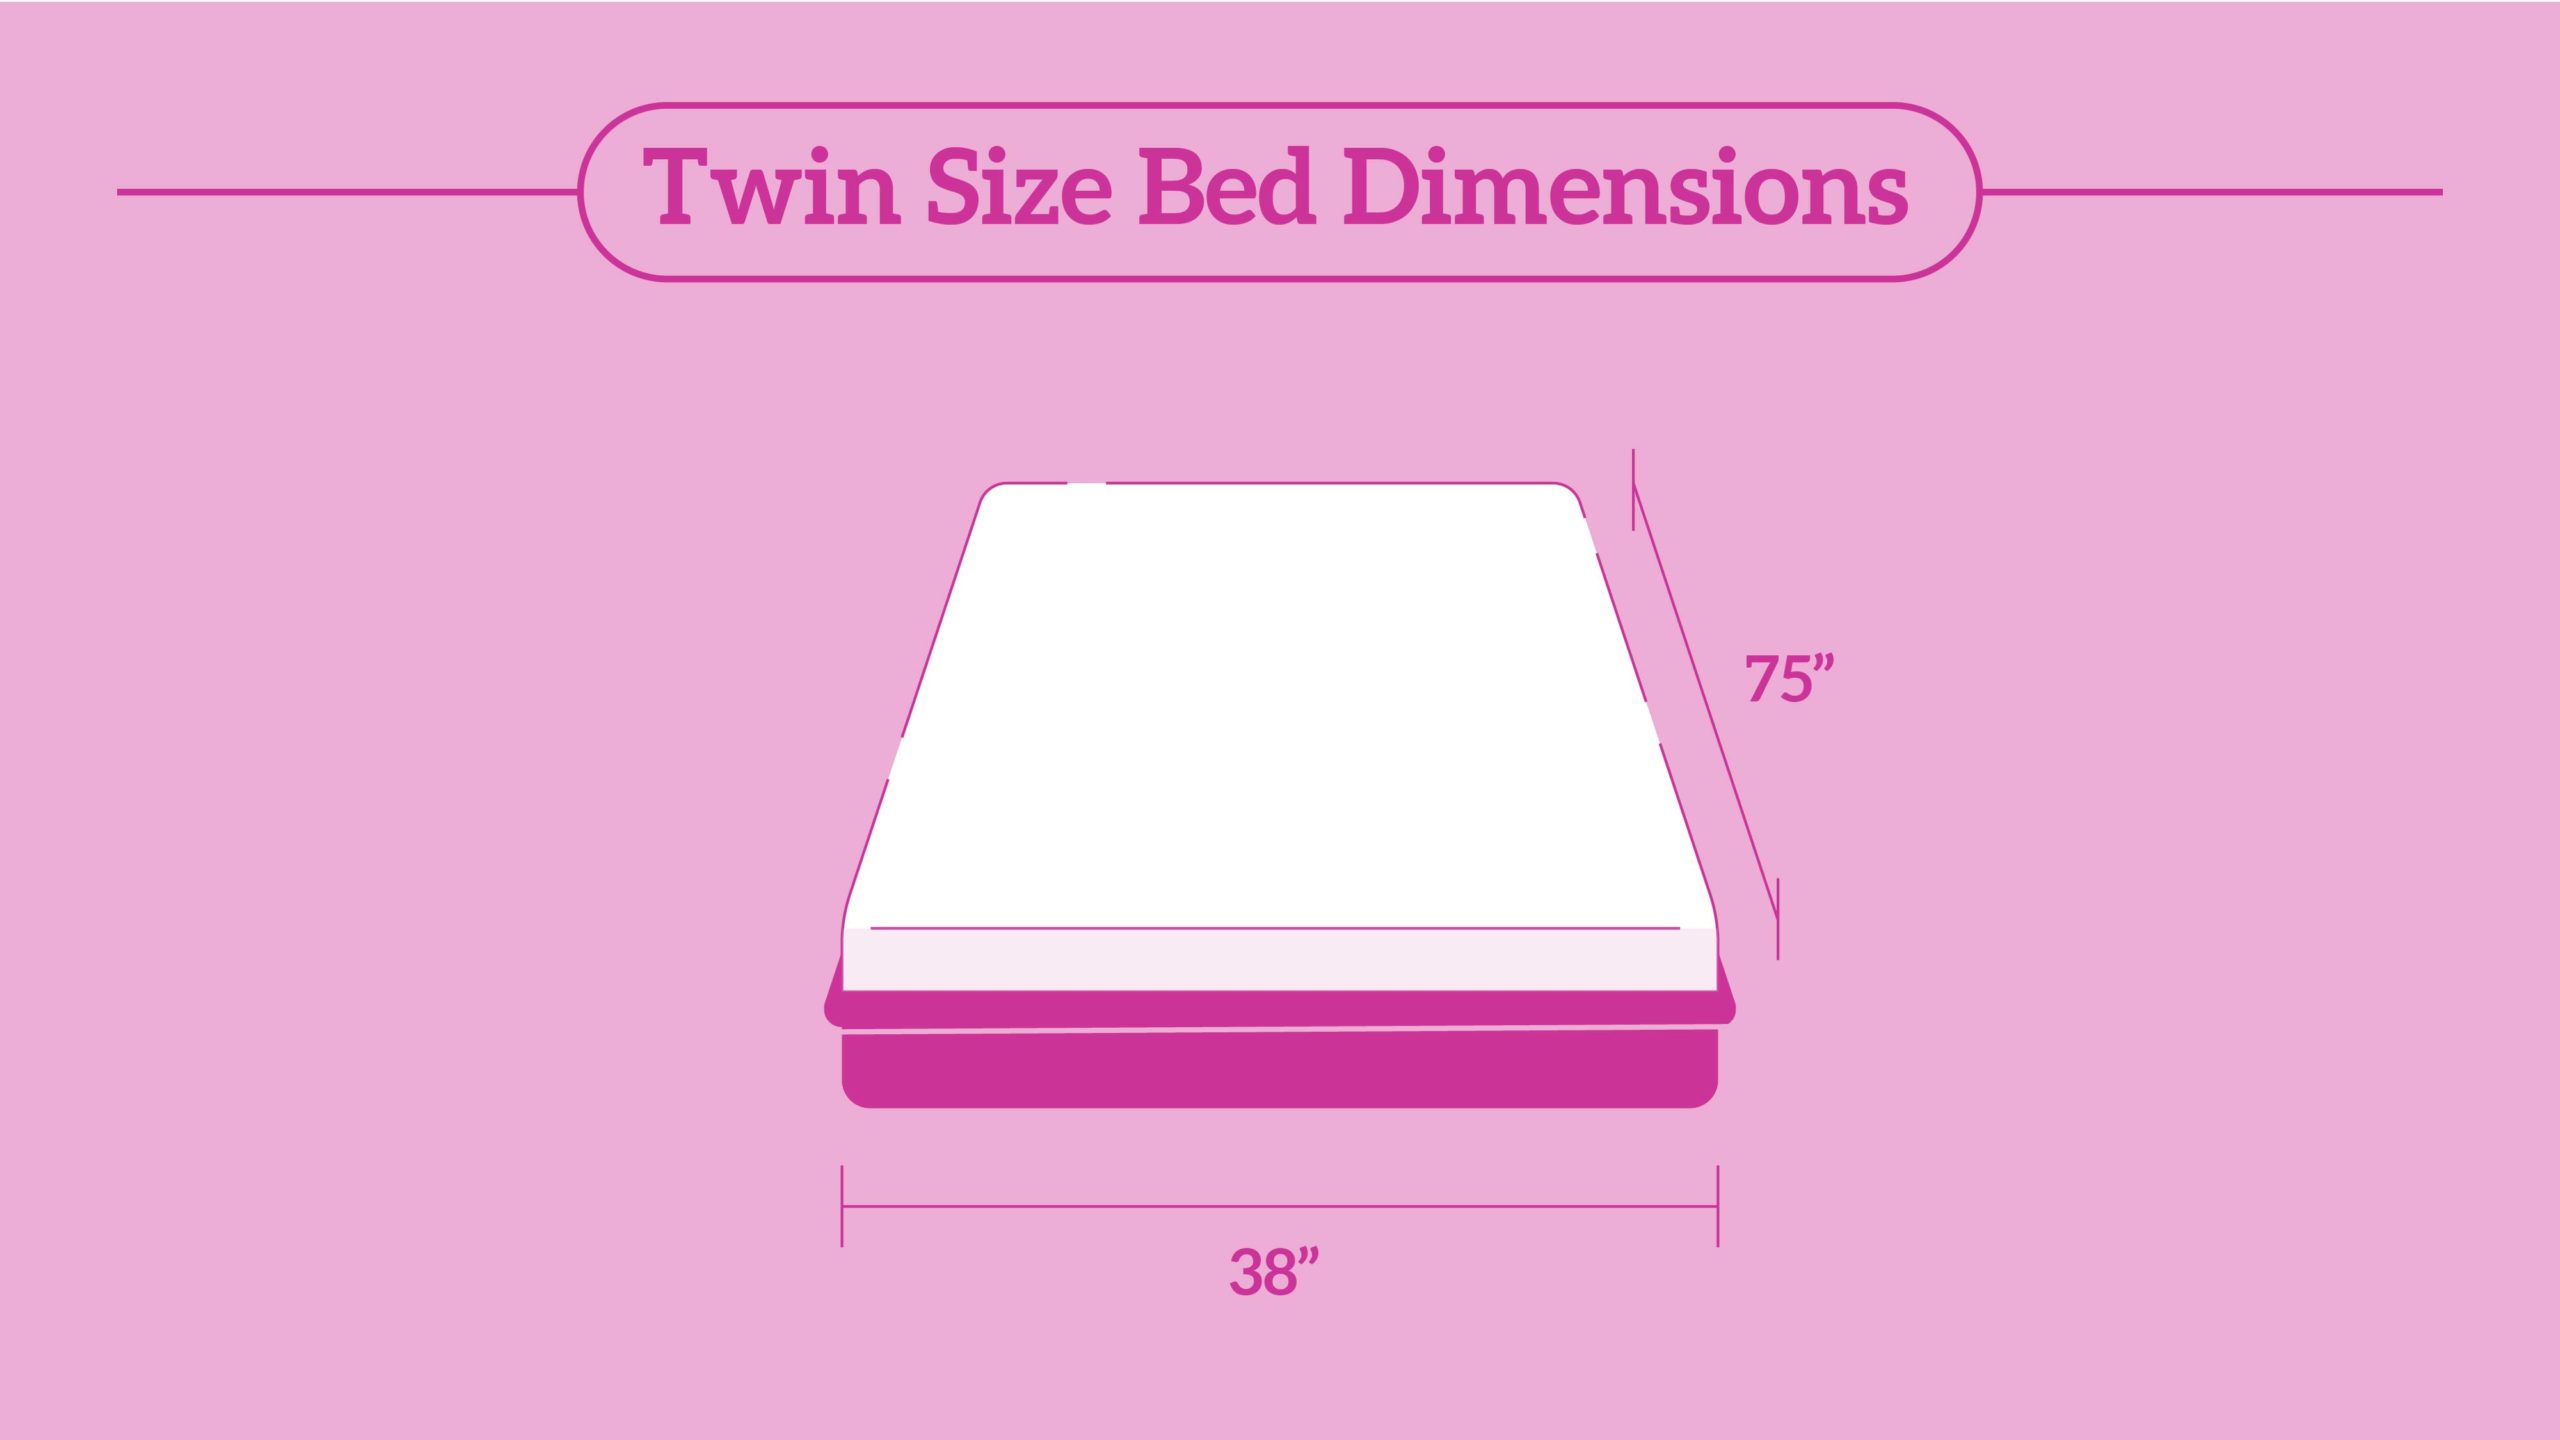 Twin Size Bed Dimensions En 01 Scaled 